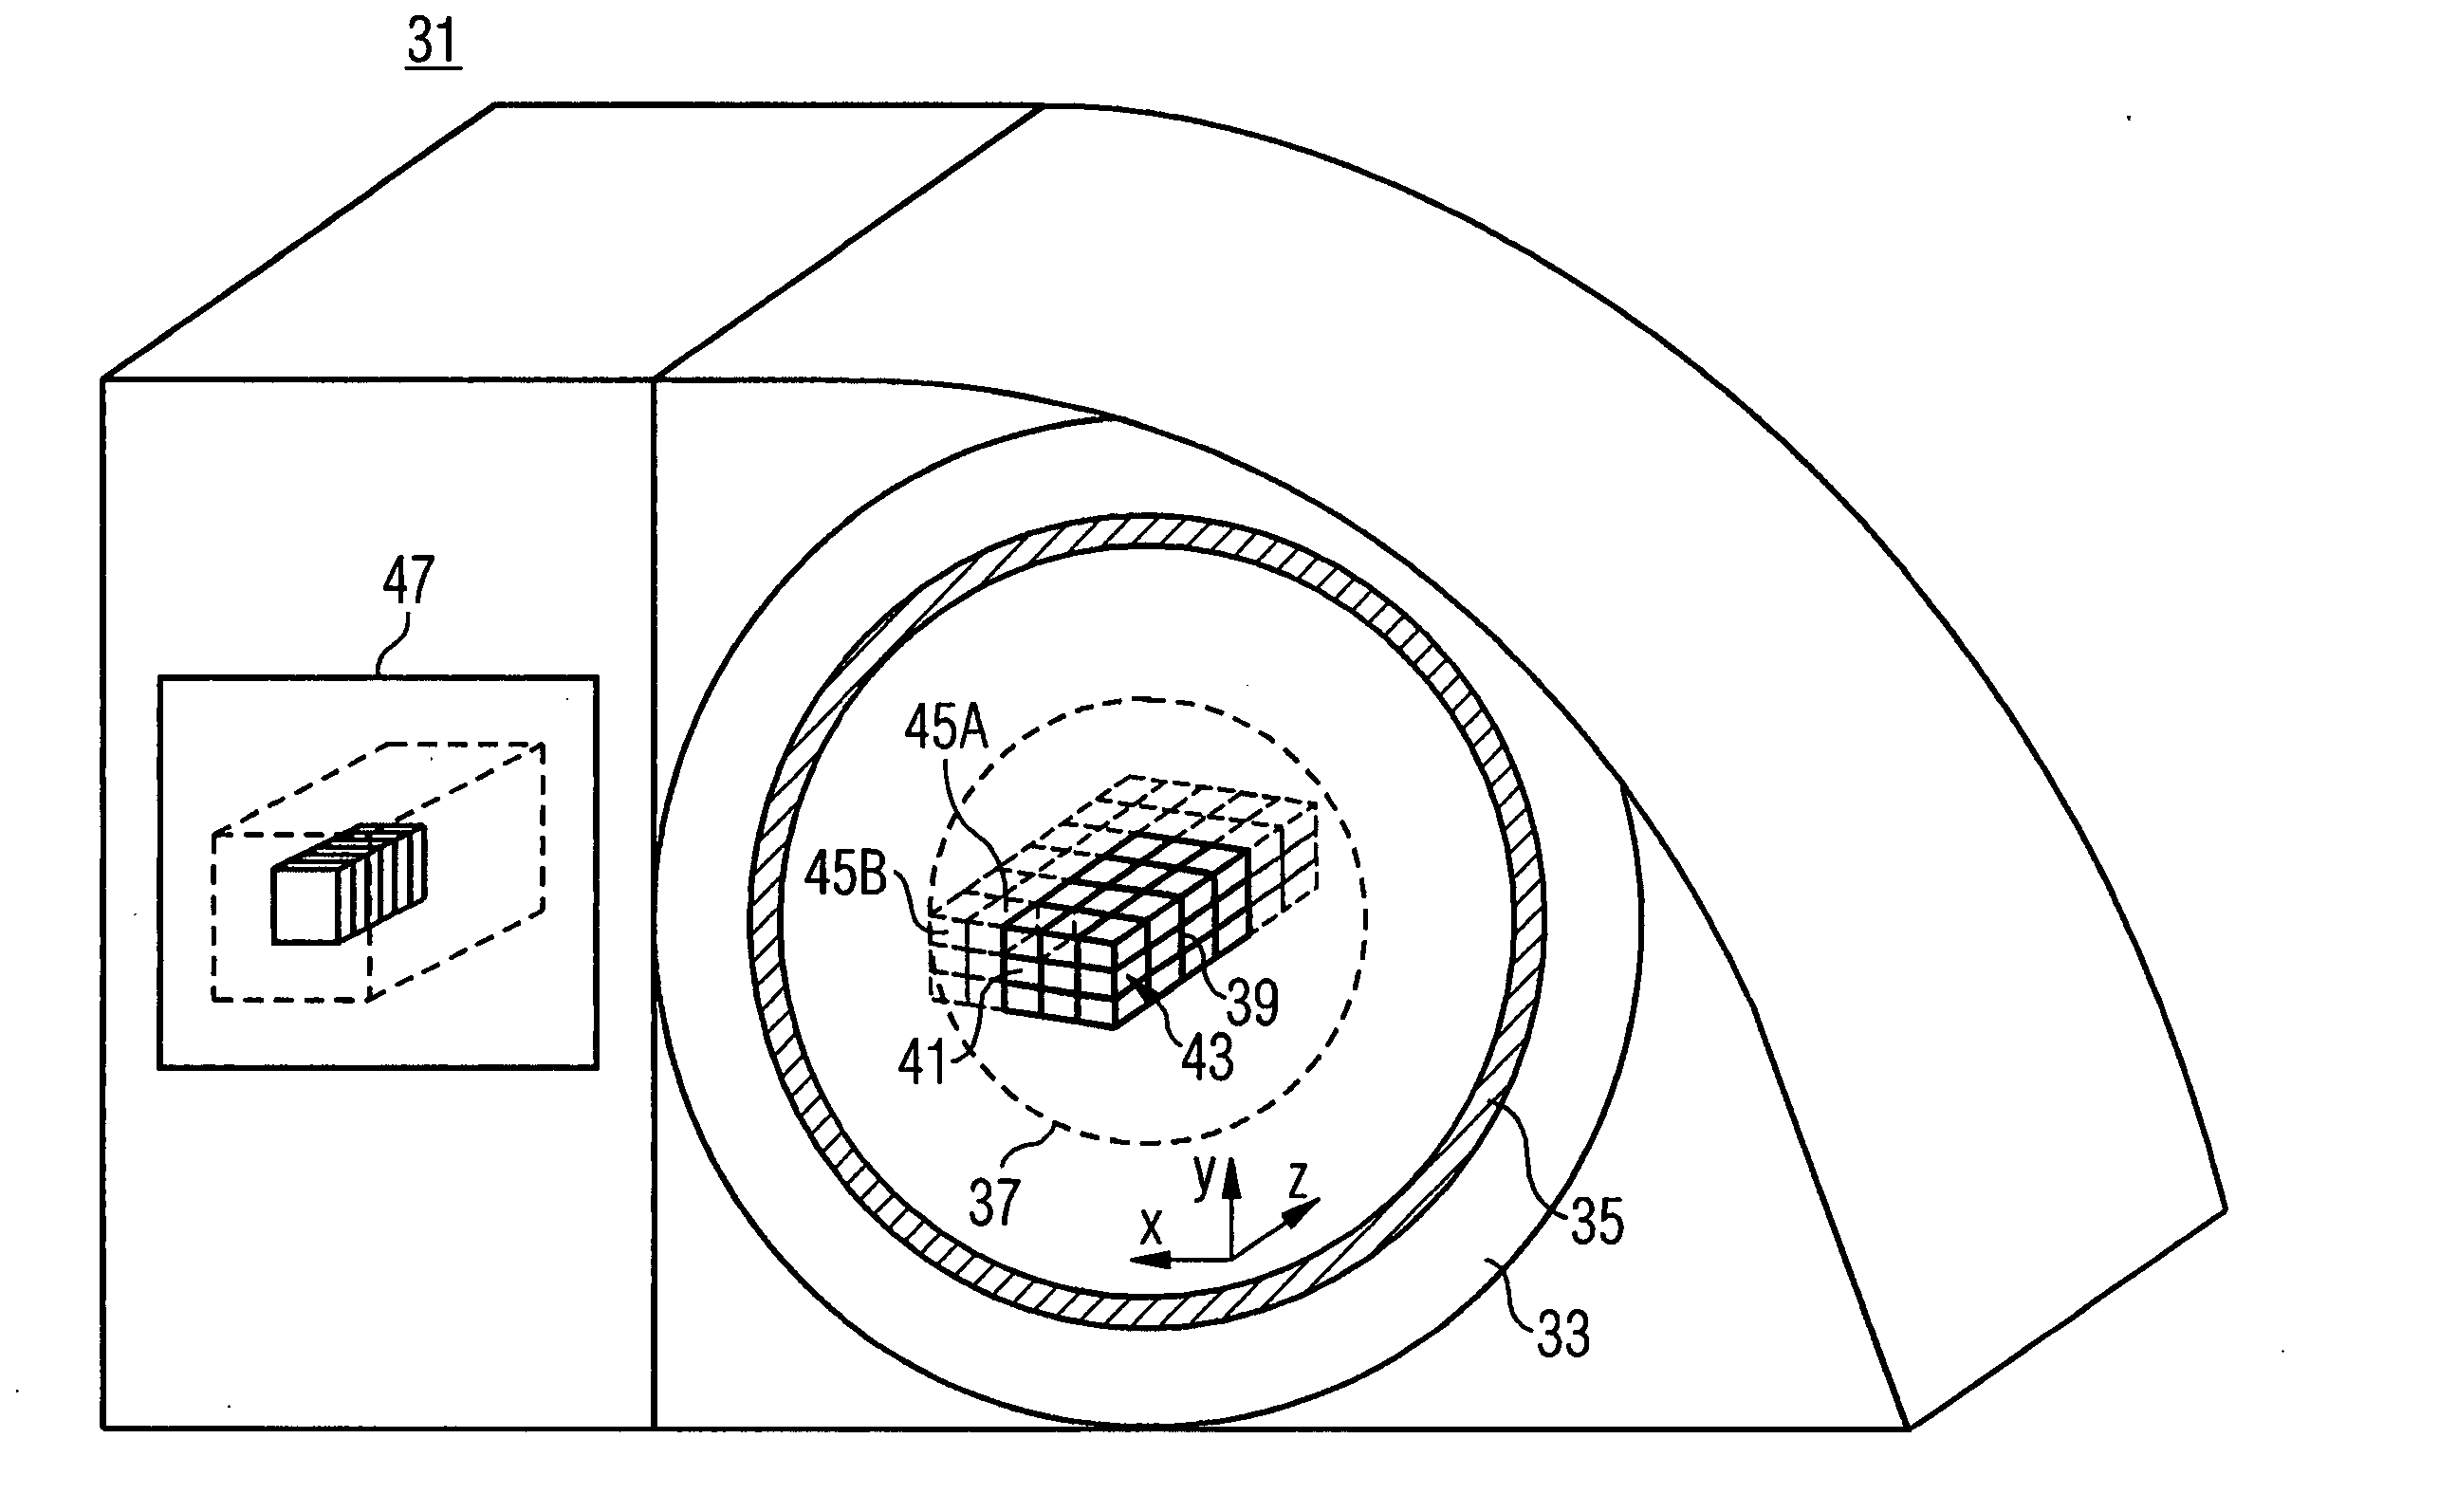 Distortion-corrected magnetic resonance measurement and magnetic resonance device